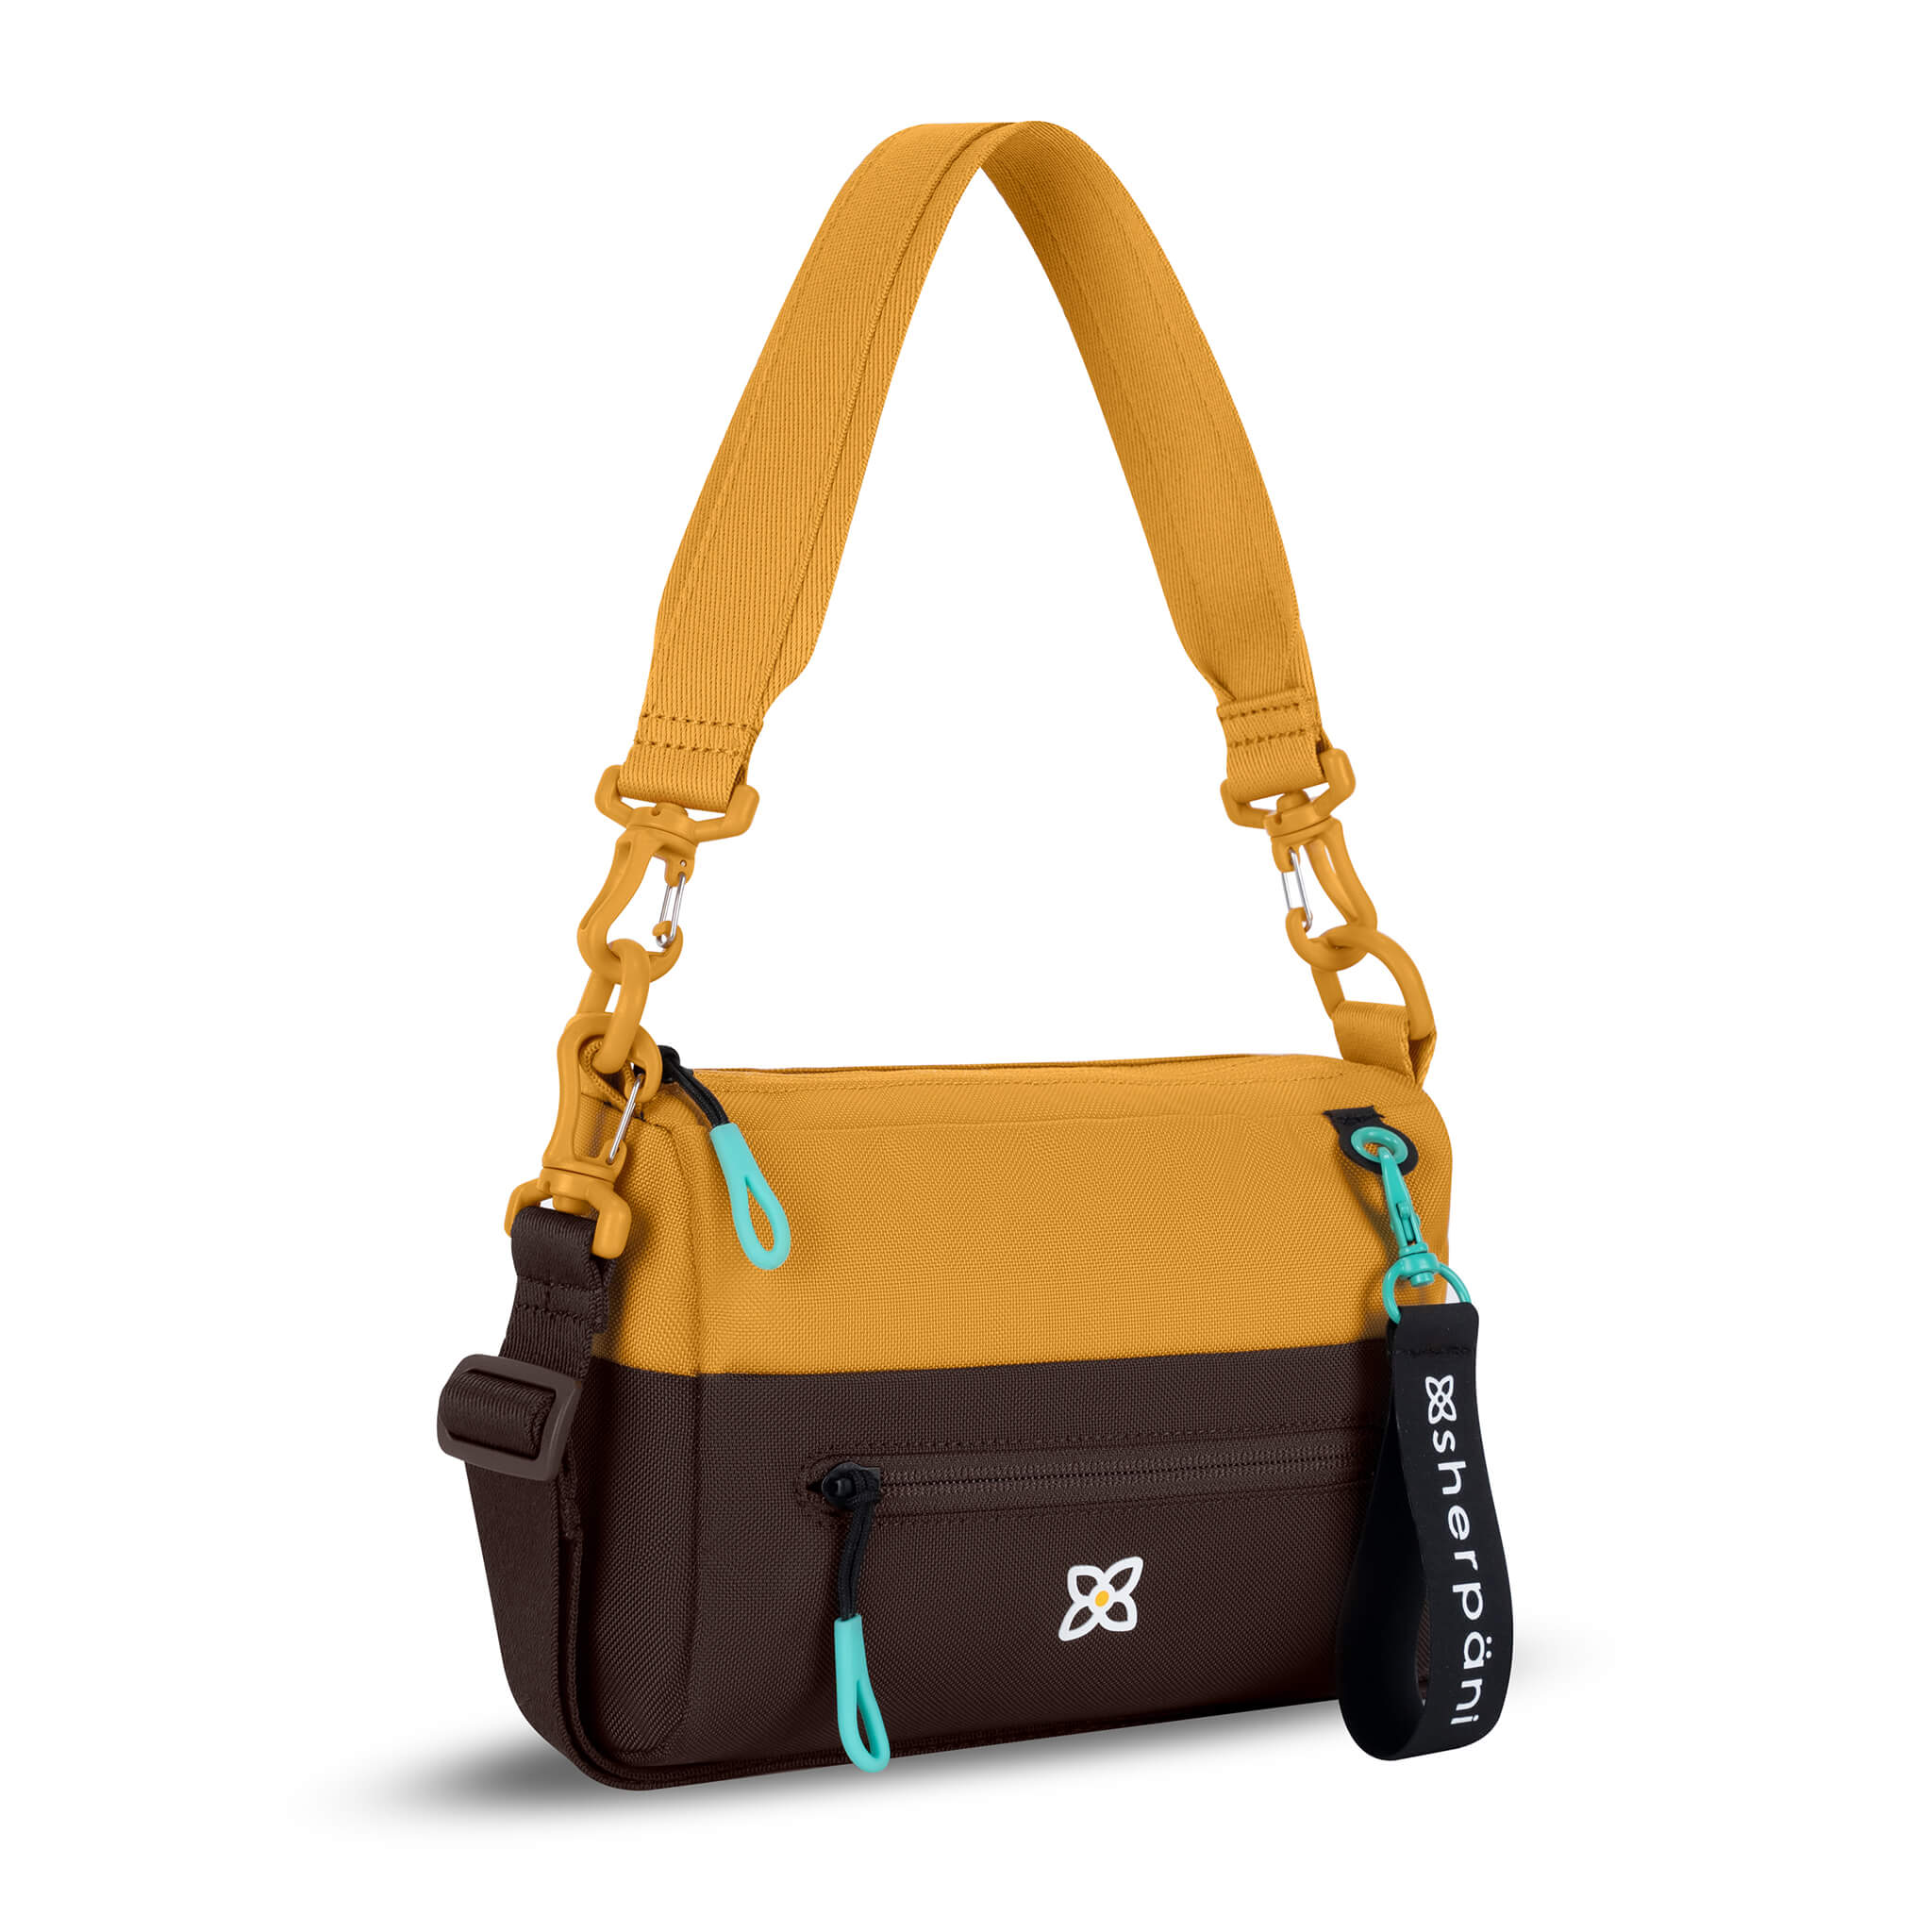 Angled front view of Sherpani mini shoulder bag, the Skye in Sundial. Skye features include RFID security, detachable keychain, outside zipper pocket, two inside zipper pockets and two removable straps: a short shoulder strap and a longer adjustable crossbody strap. The Sundial color is two-toned in yellow and dark brown with turquoise accents.